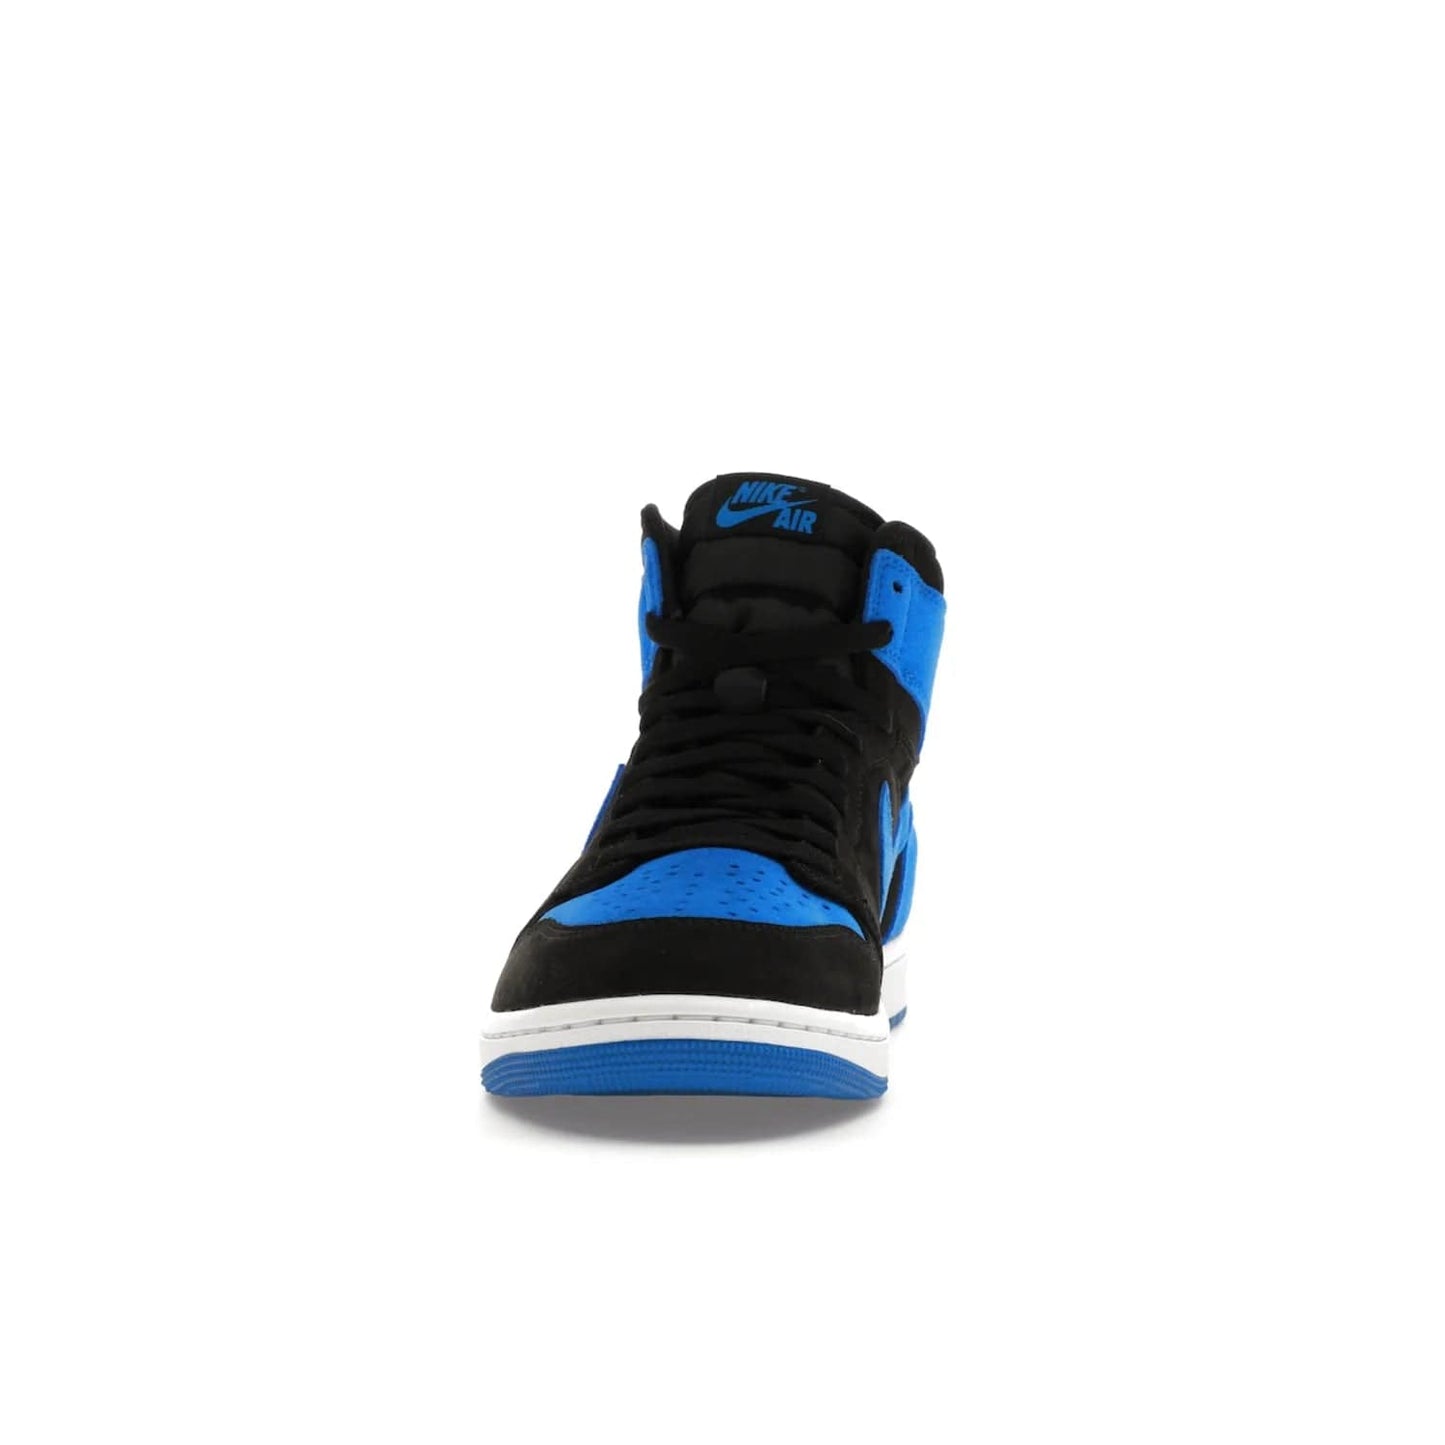 Jordan 1 Retro High OG Royal Reimagined - Image 11 - Only at www.BallersClubKickz.com - ####
Old meets the new: Jordan 1 Retro High OG 'Royal Reimagined' is a bold statement of evolution with its royal blue and black suede material makeup. Swoosh overlays, Wings logos, padded ankle collars and Nike Air tags maintain the OG's legendary lineage. Get a pair on November 4th and be part of a fearless, unyielding story.